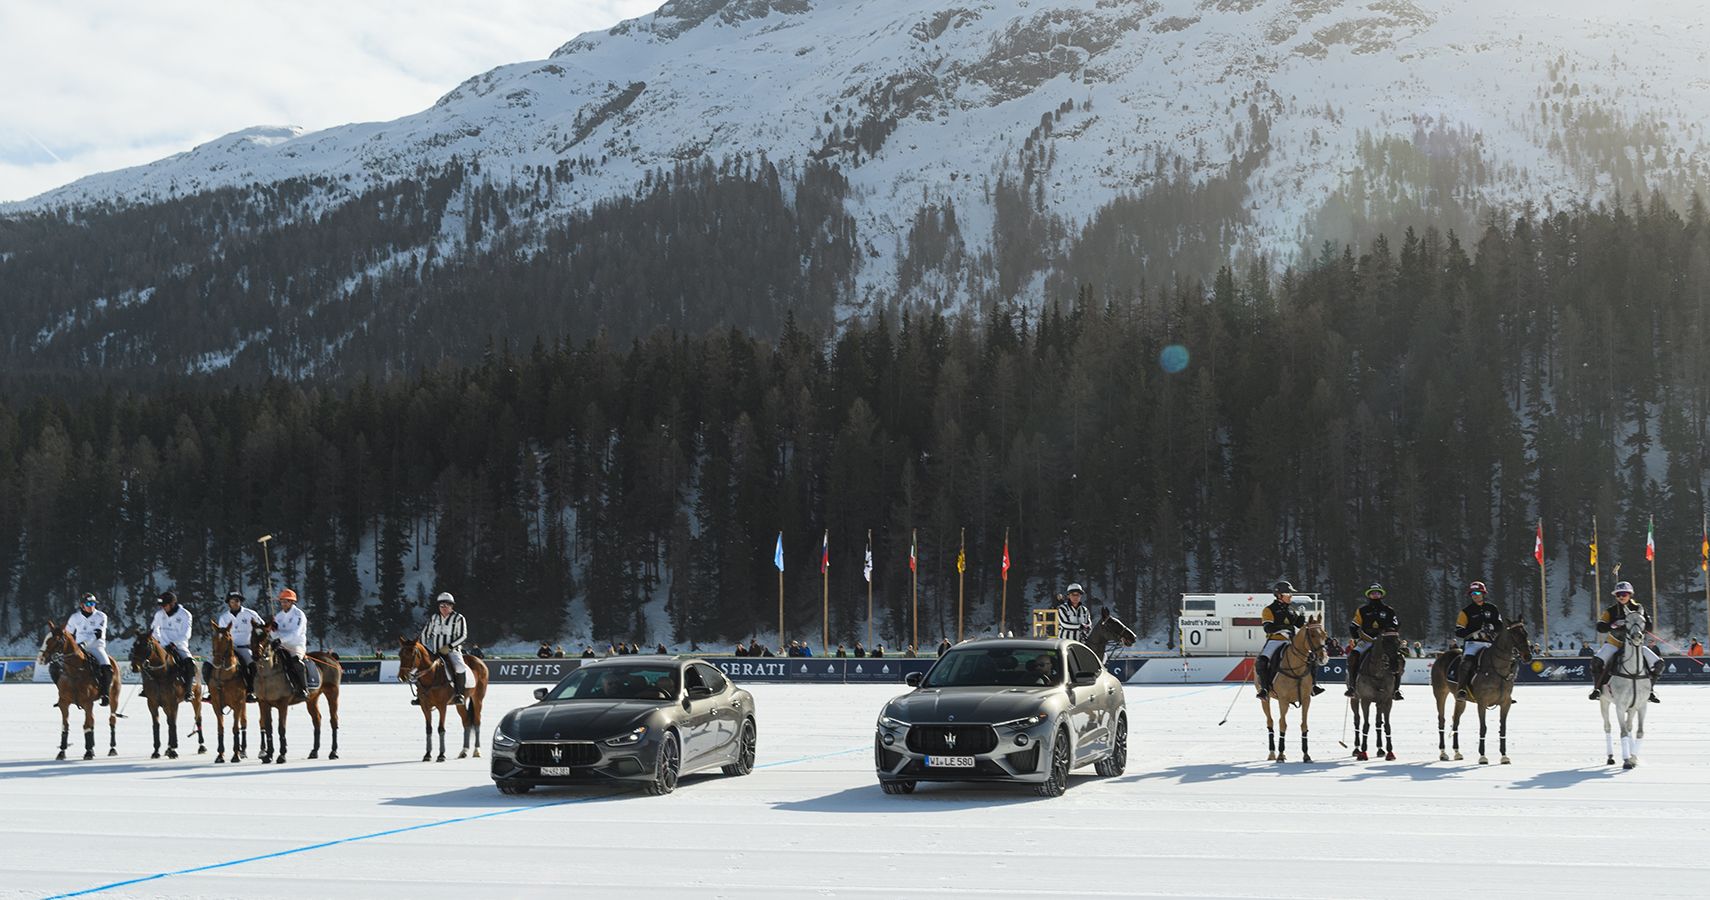 Snow Polo World Cup Maserati Royale reveal